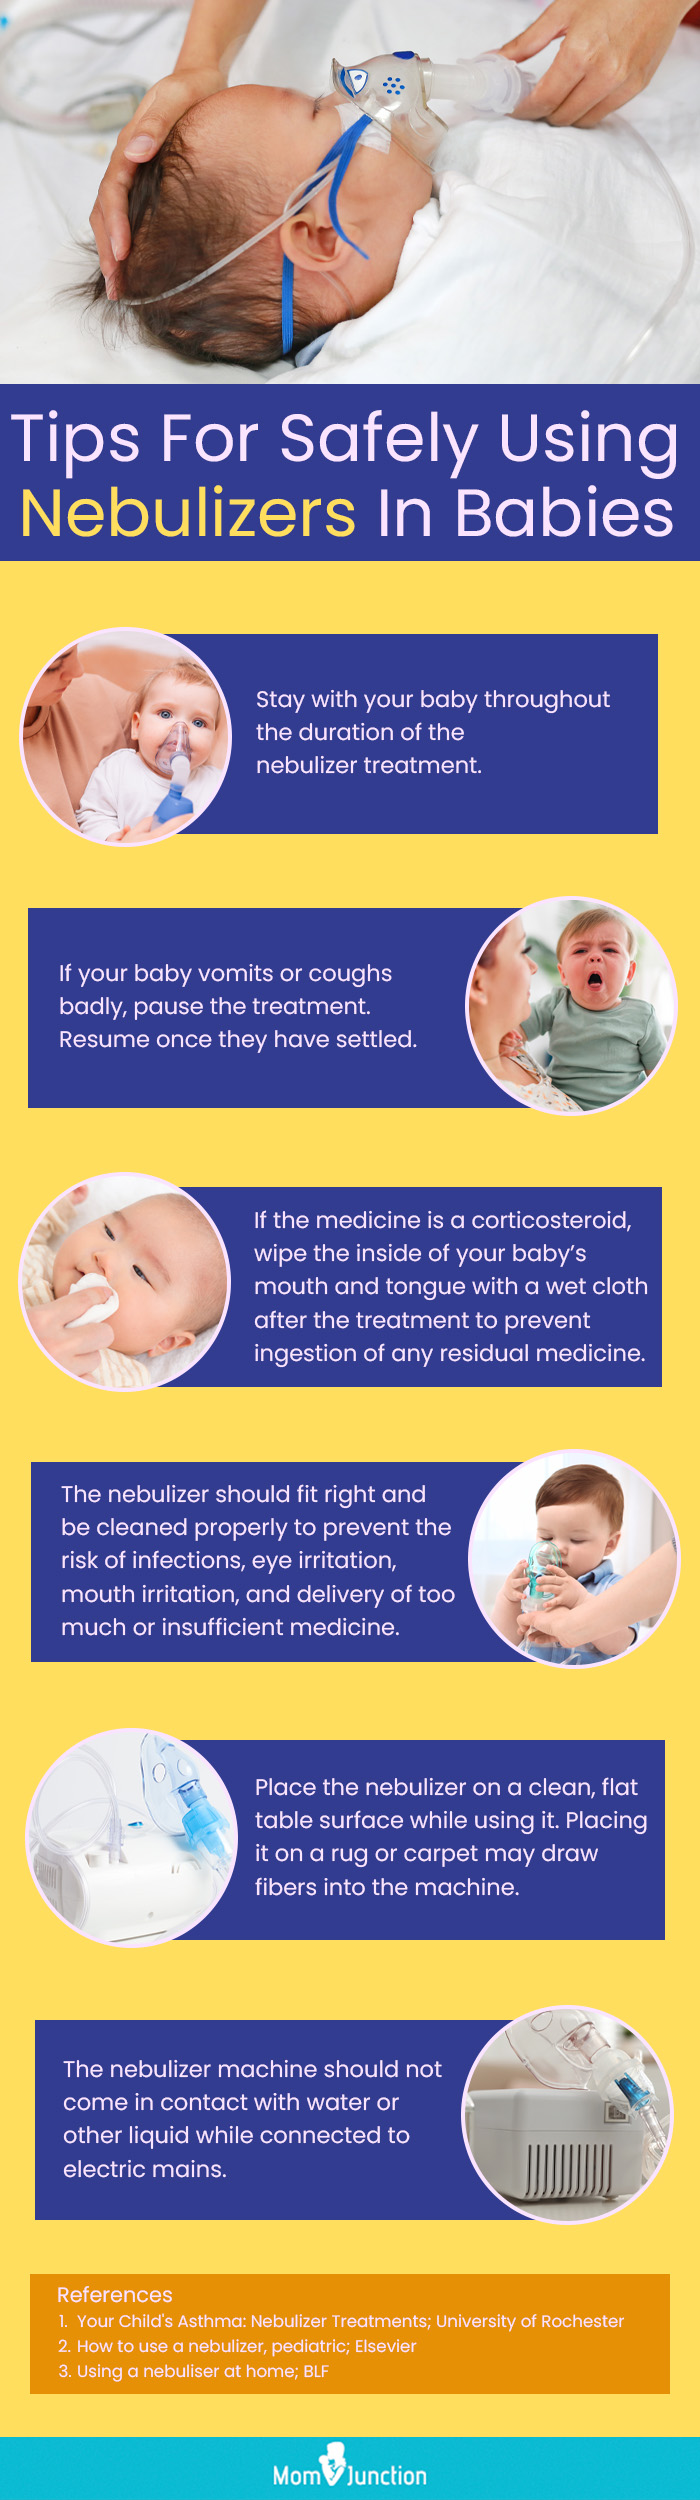 tips for safely using nebulizers in babies (infographic)